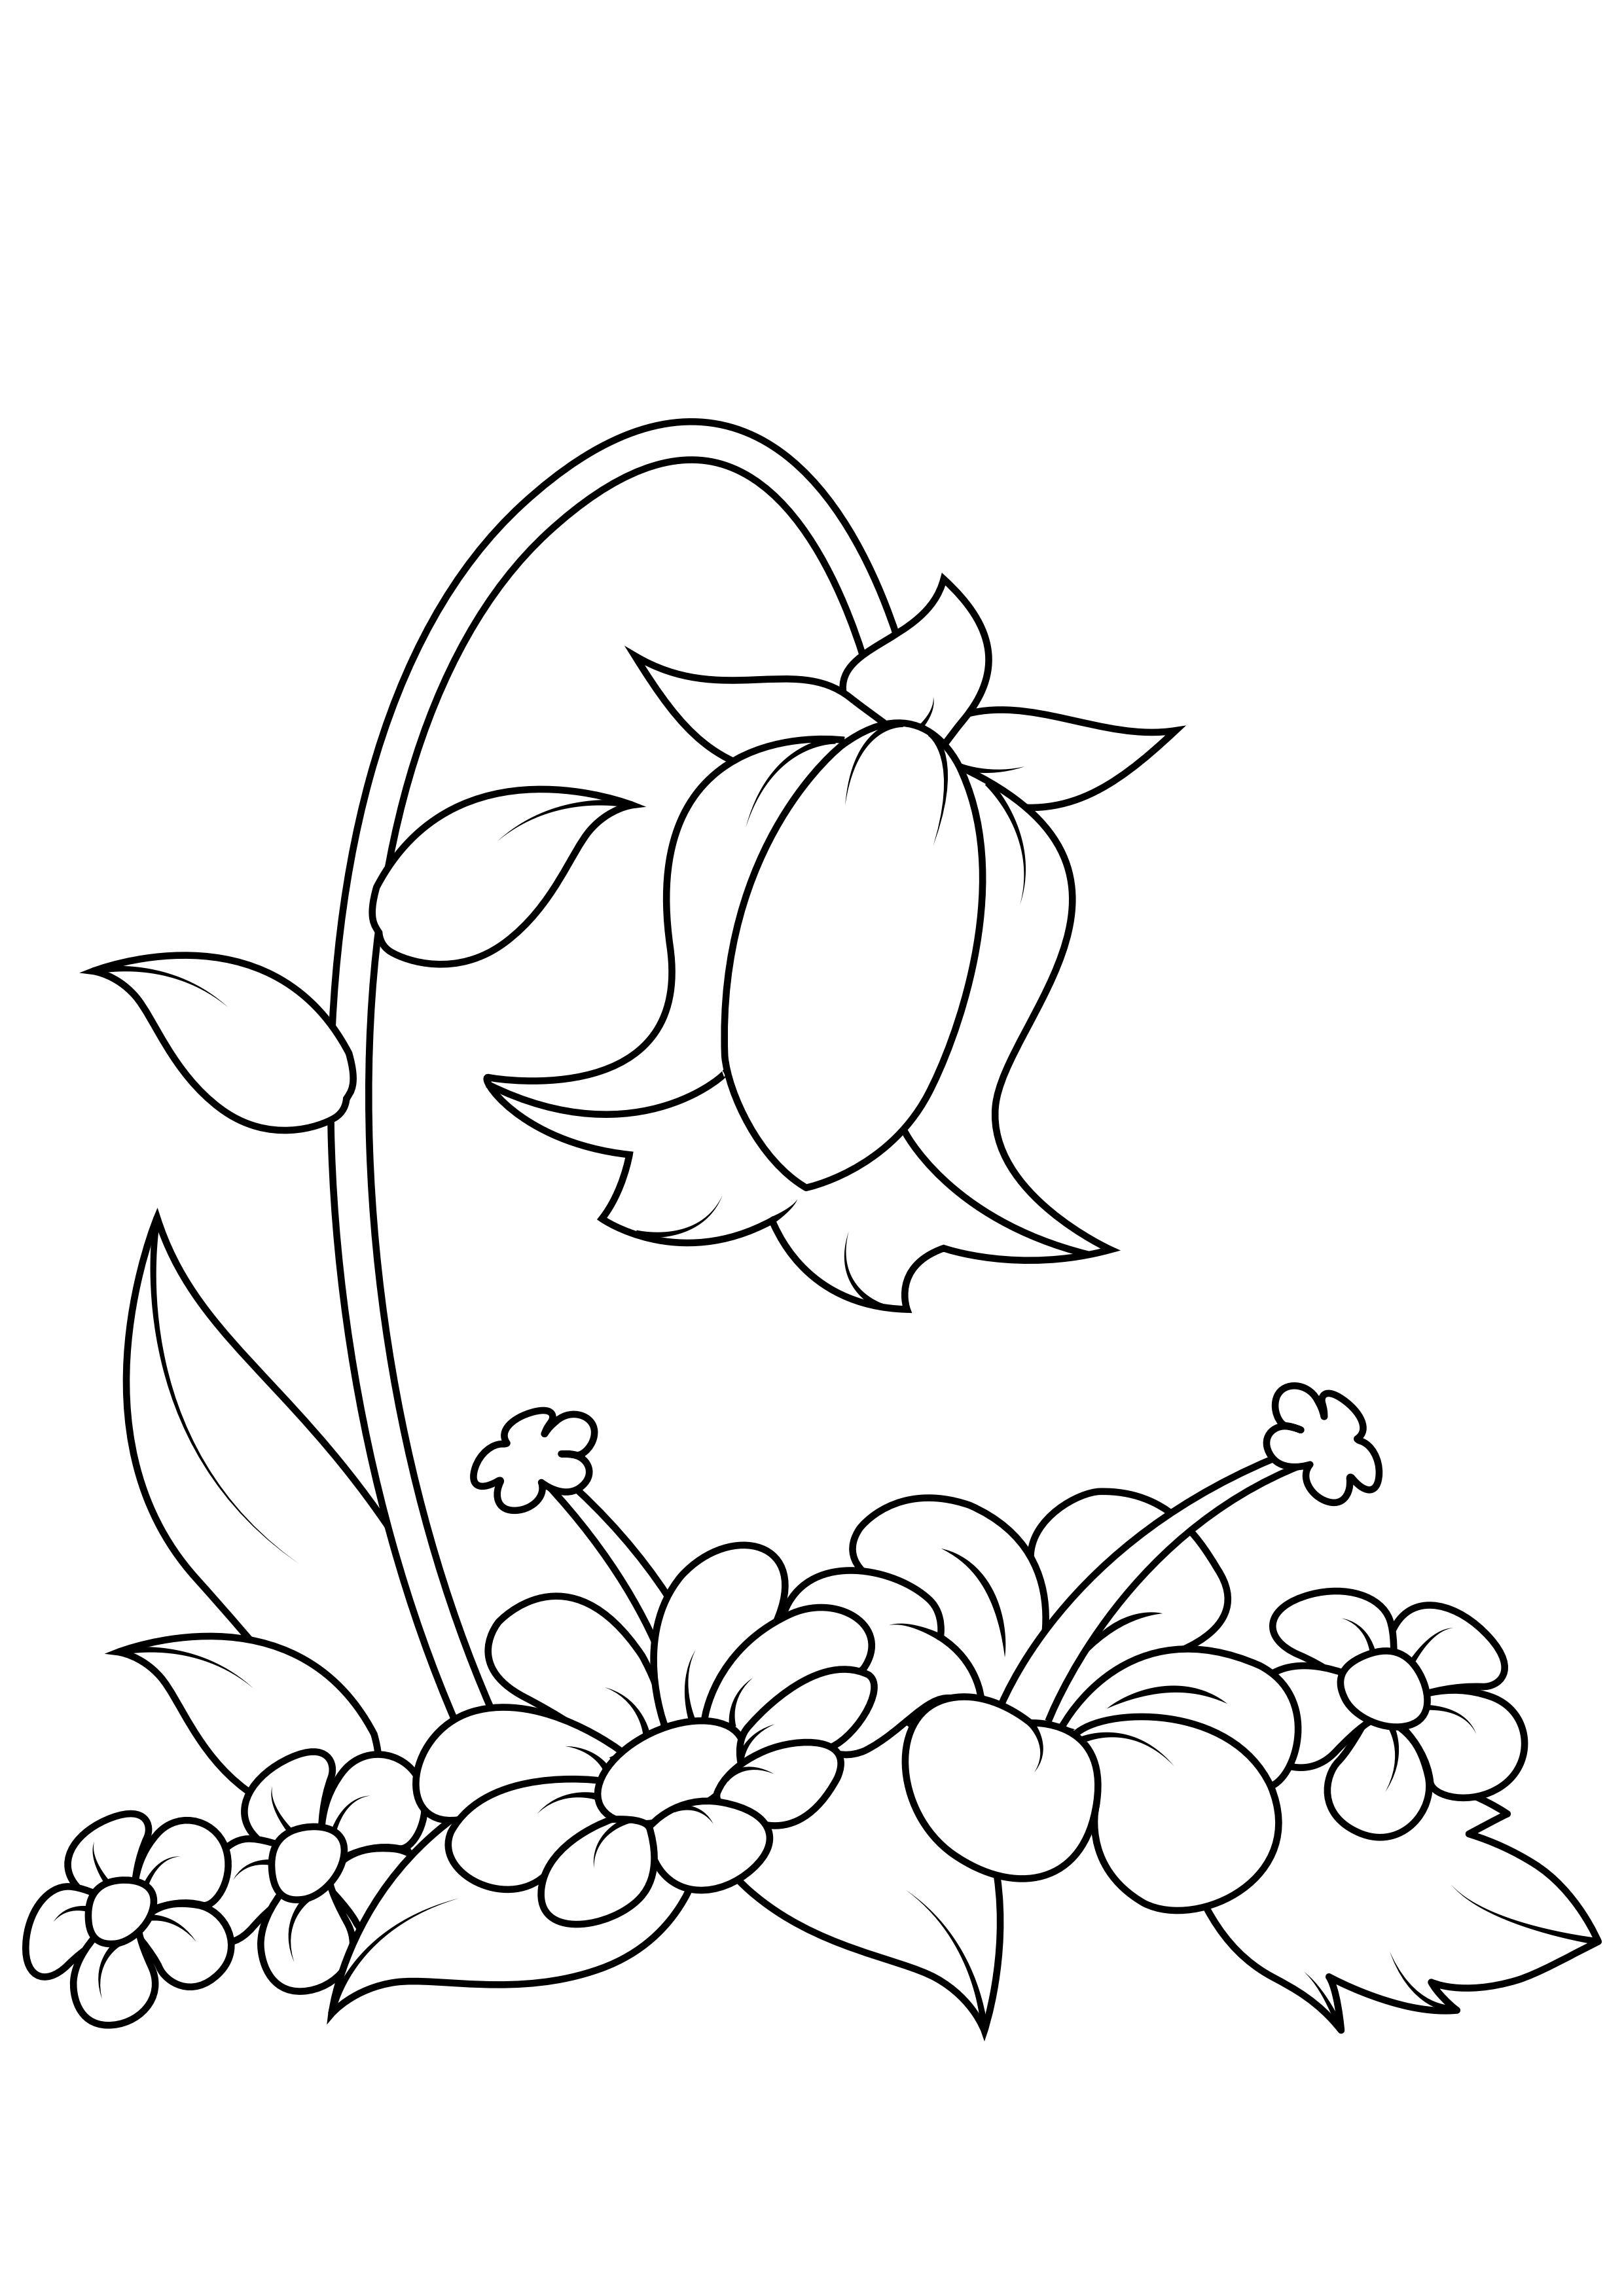 Coloring page flower